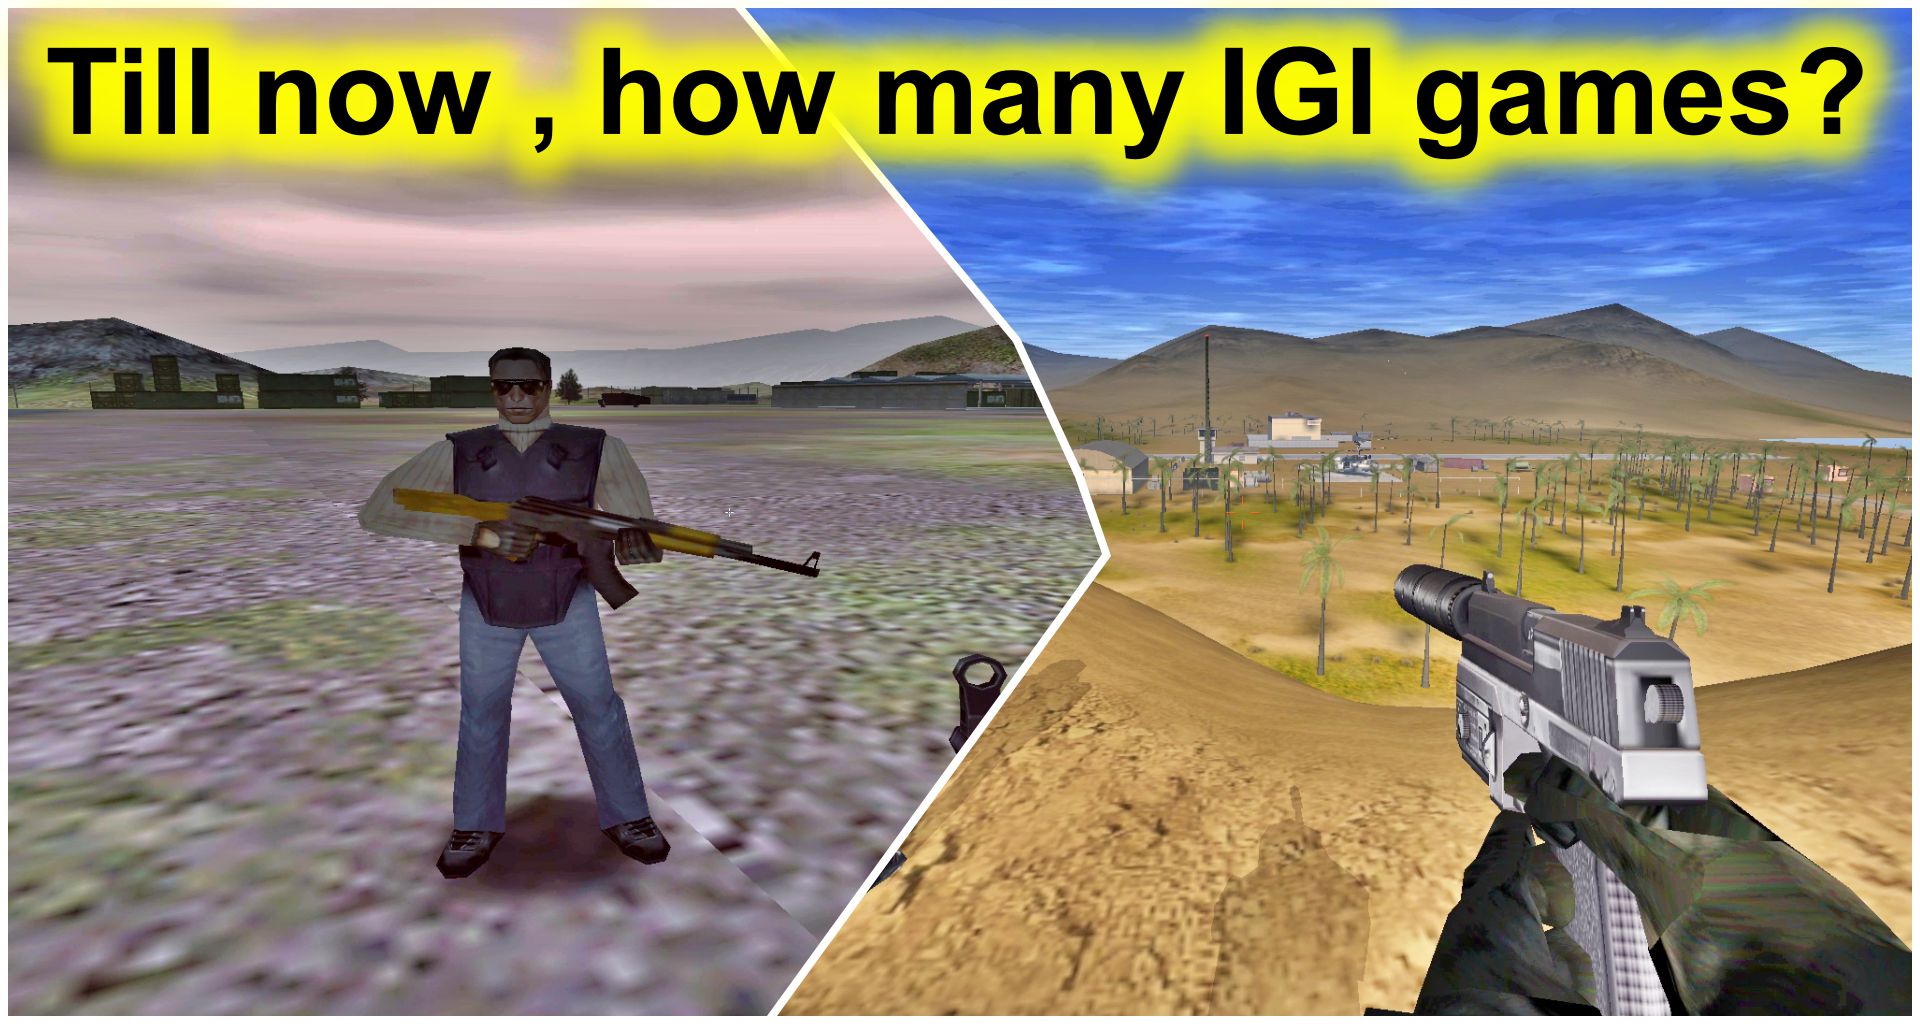 how many IGI games are there - (till now)